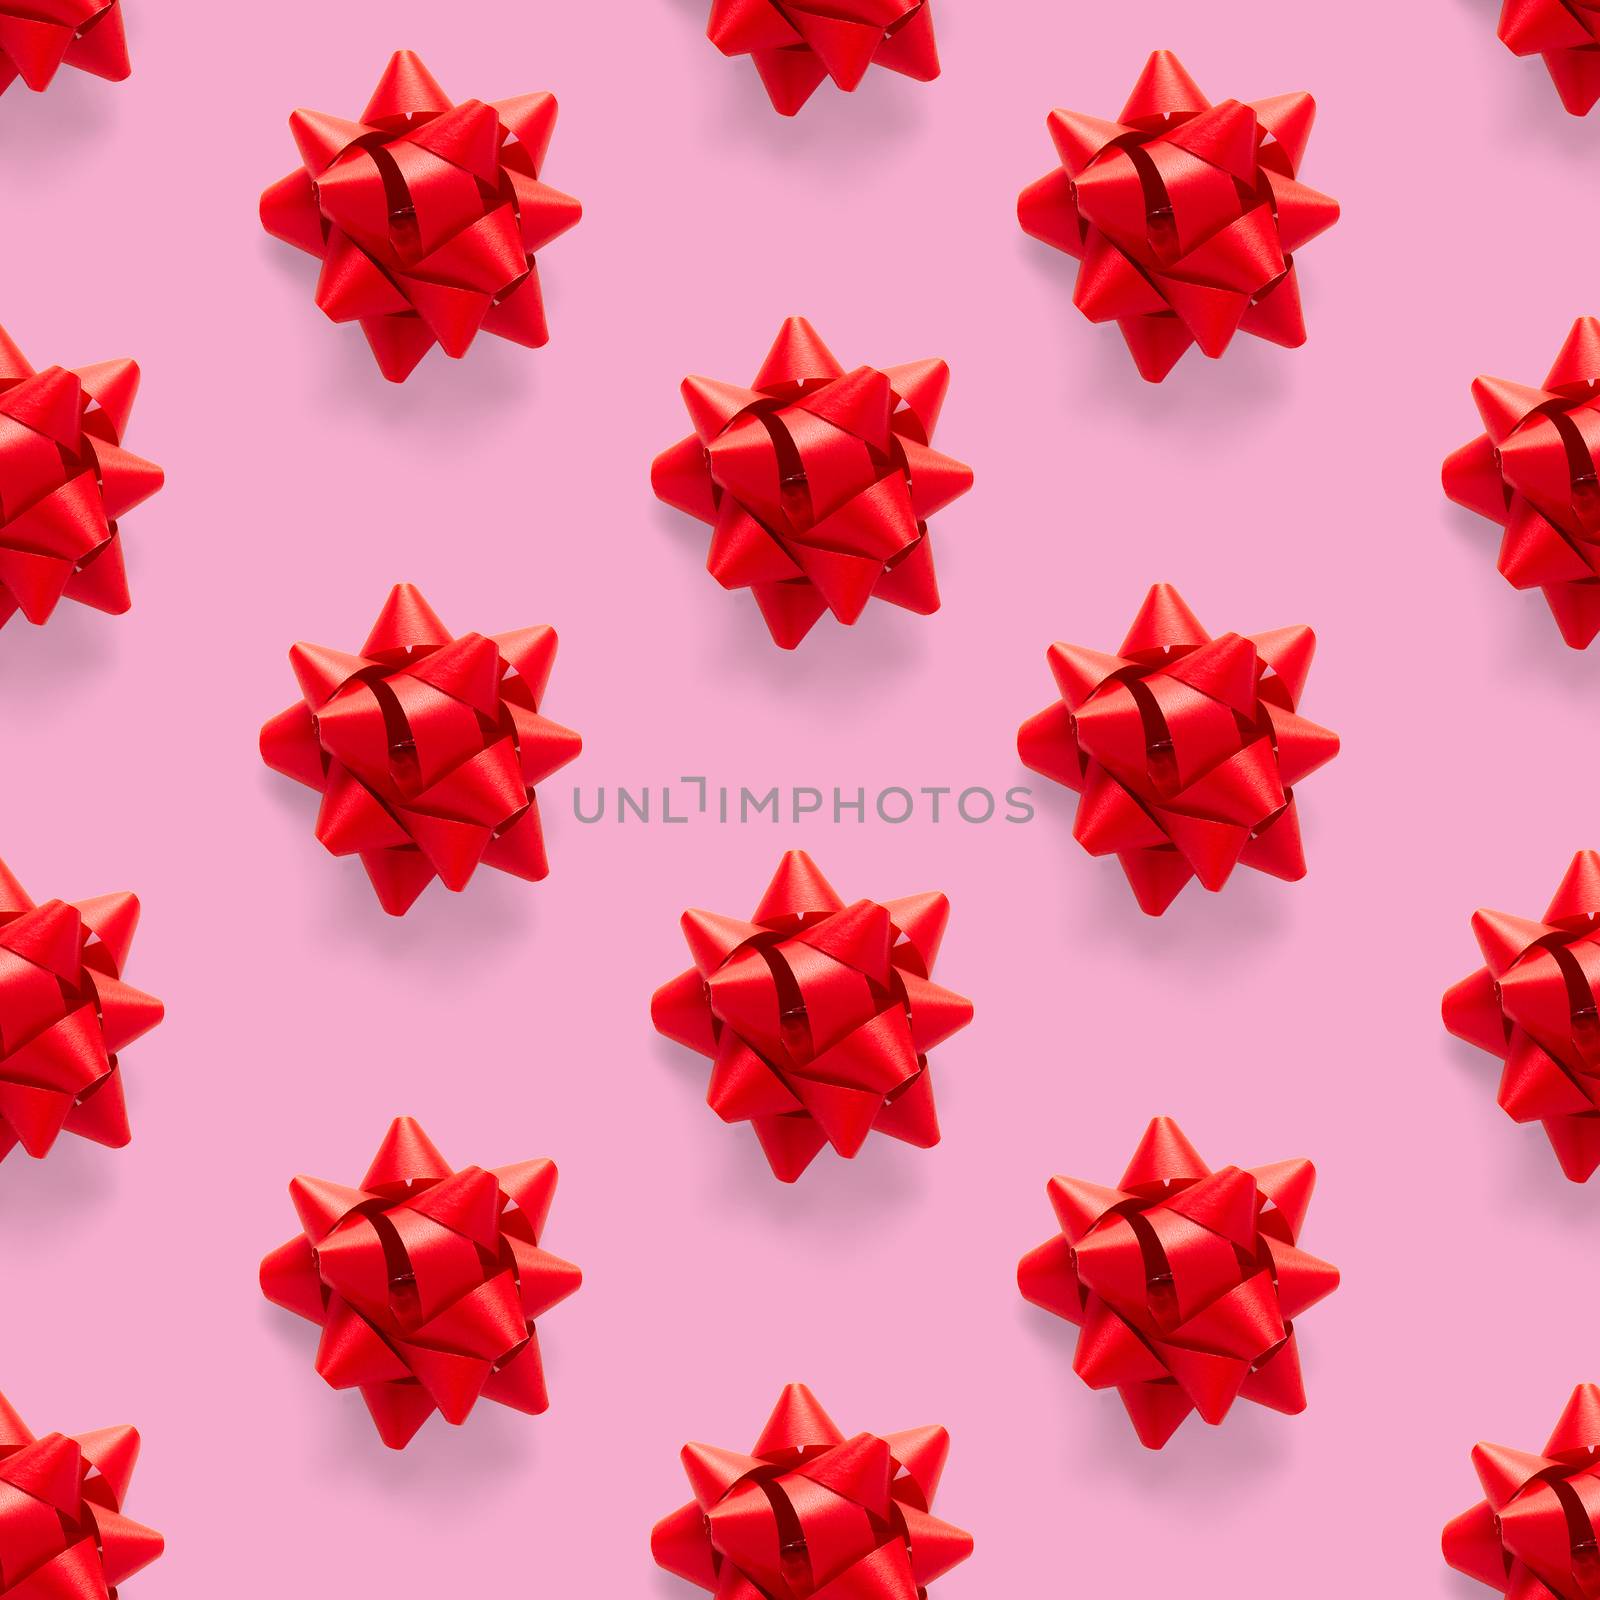 Seamless regular creative Christmas pattern with New Year decorations on pink background. xmas Modern Seamless pattern made from christmas decorations. Photo quality pattern for fabric, prints, wallpapers, banners or creative design works.